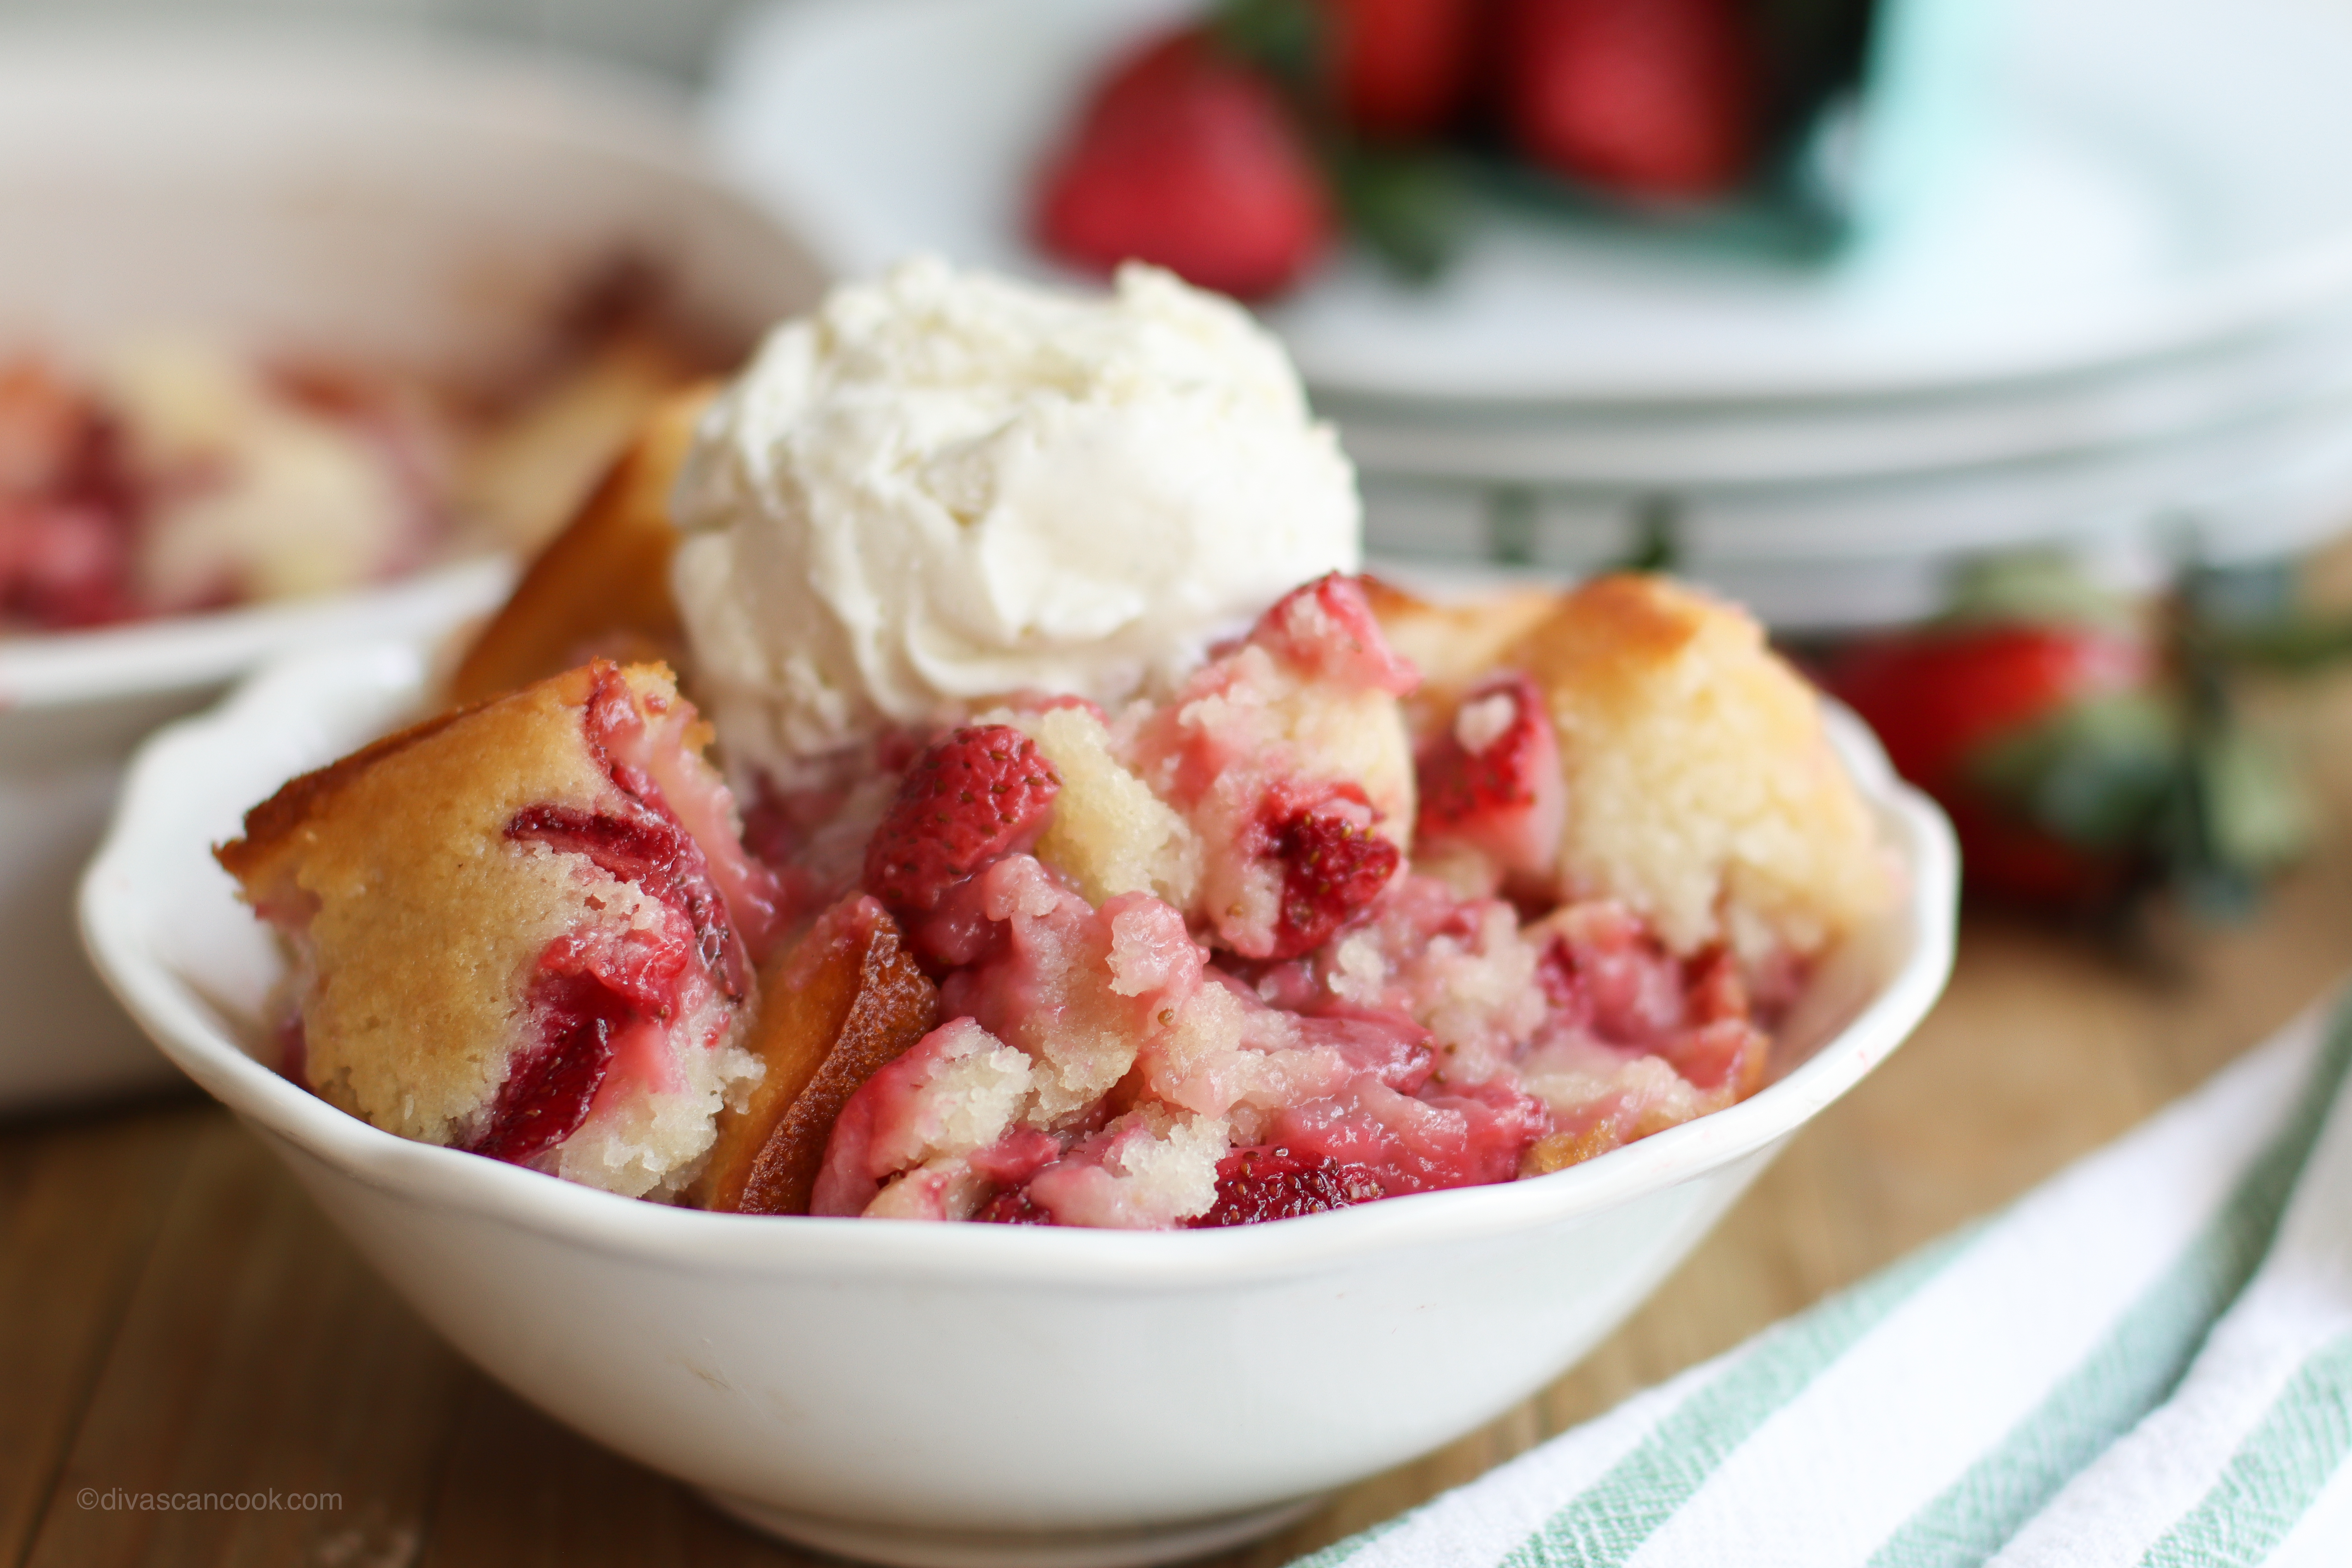 Washday Cobbler Recipe: Deliciously Easy Dessert for Busy Days